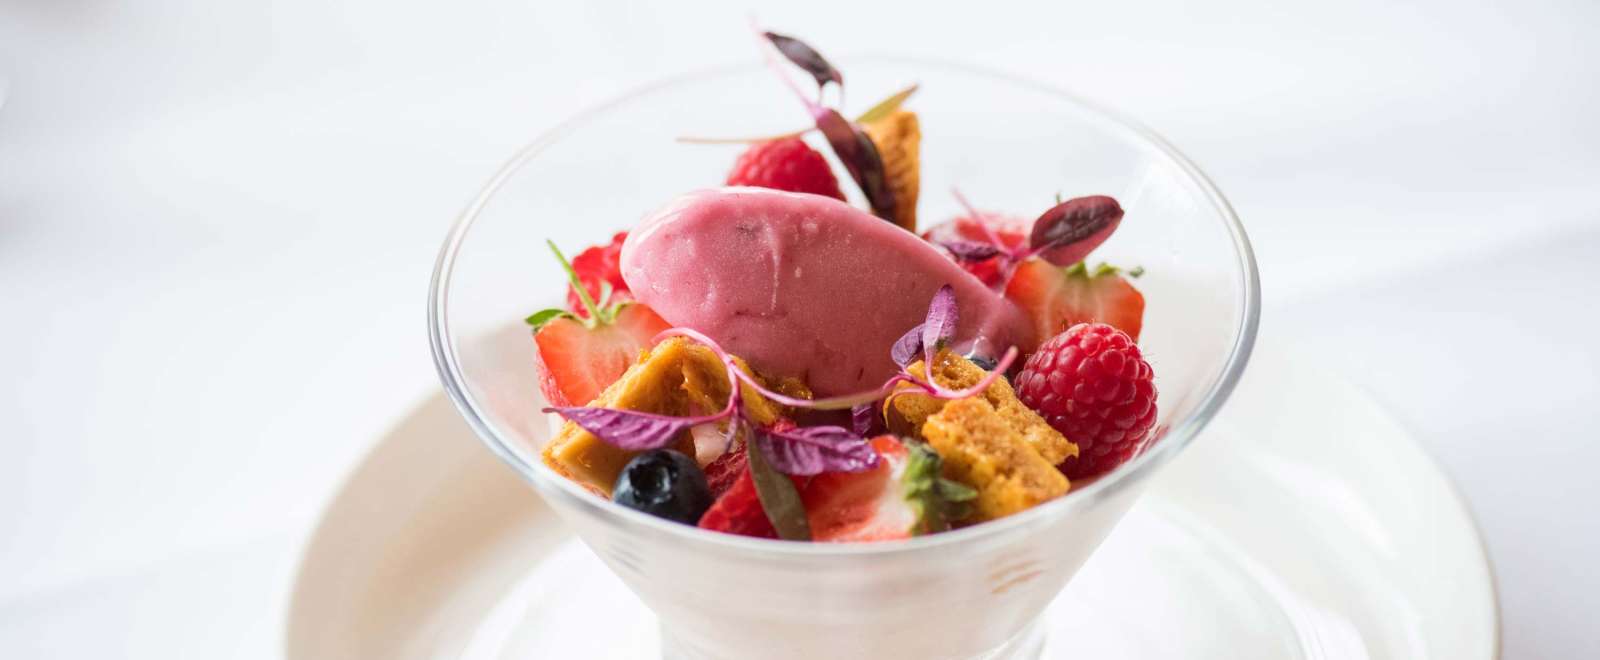 Imperial Hotel Restaurant Dining Vanilla Panna Cotta with Berries Sorbet and Honeycomb | Dessert